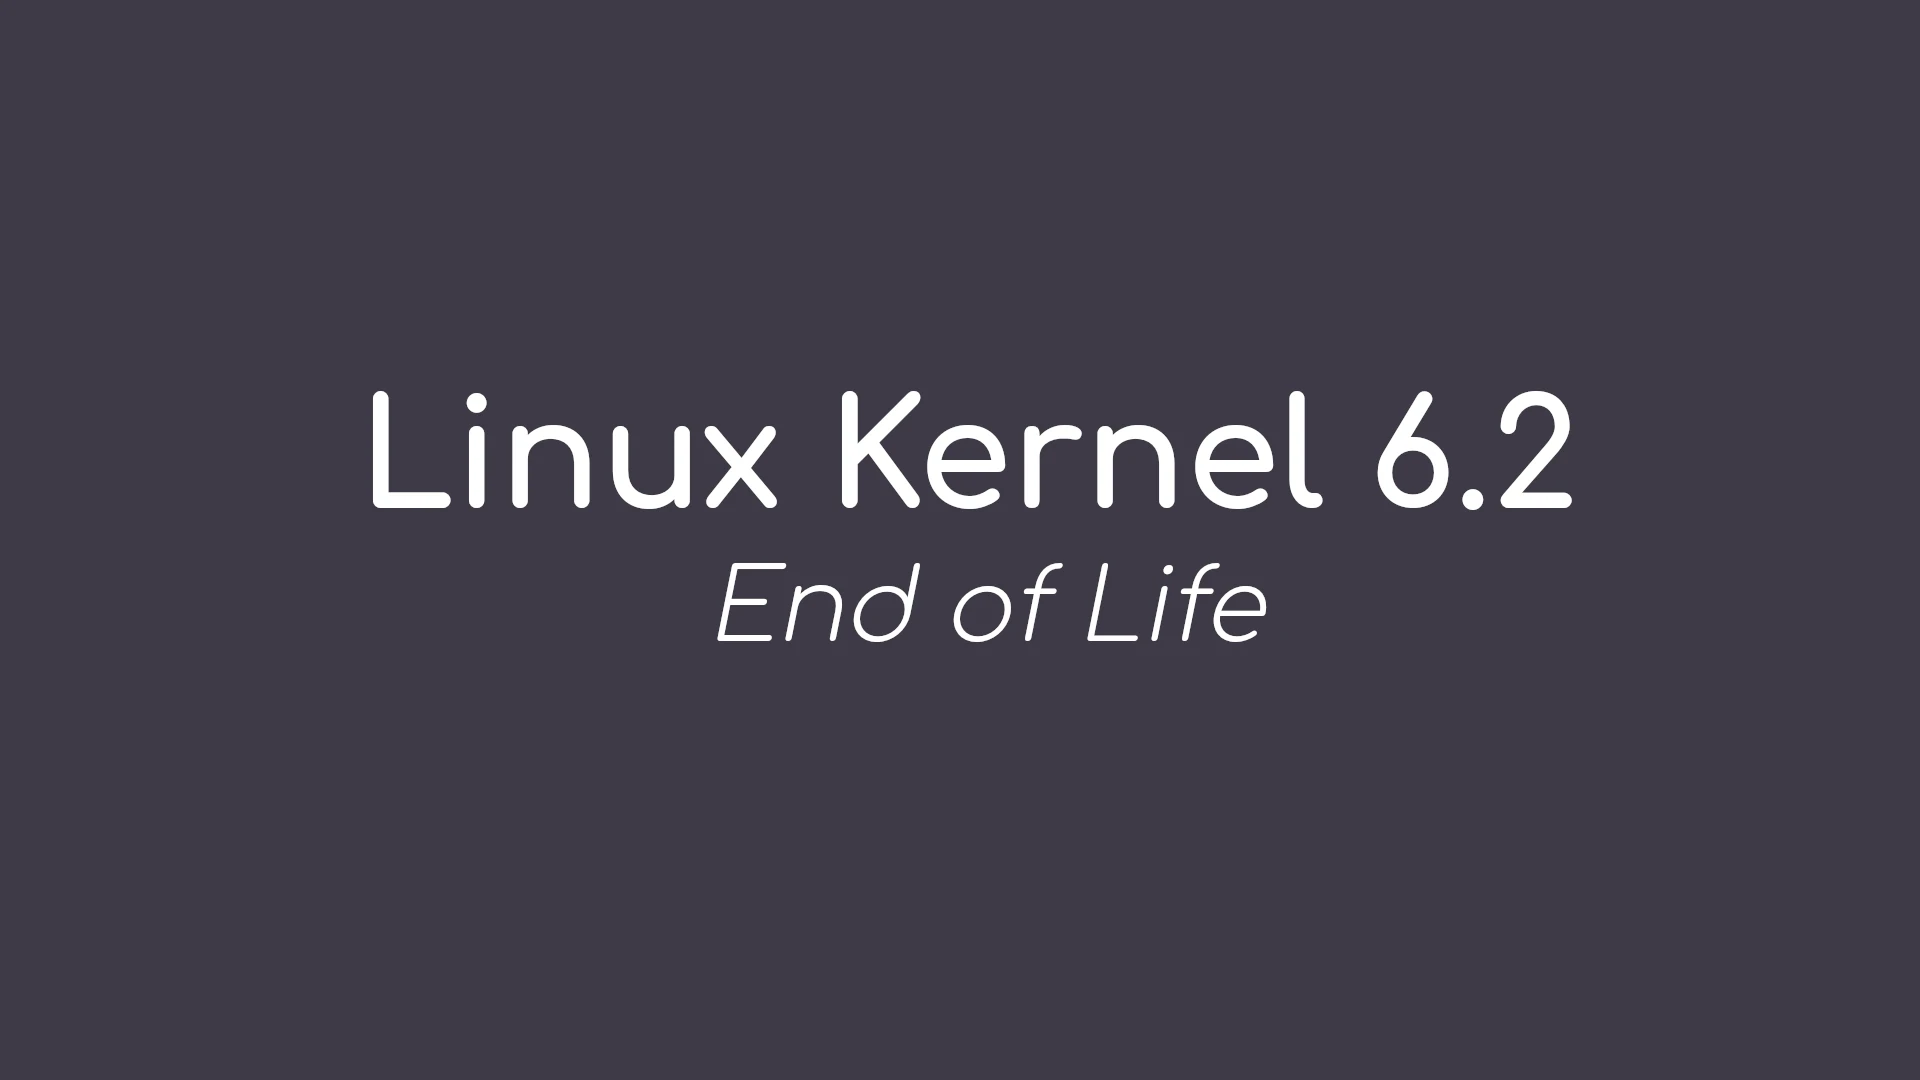 Linux Kernel 6.2 Reaches End of Life, Users Urged to Upgrade to Linux Kernel 6.3